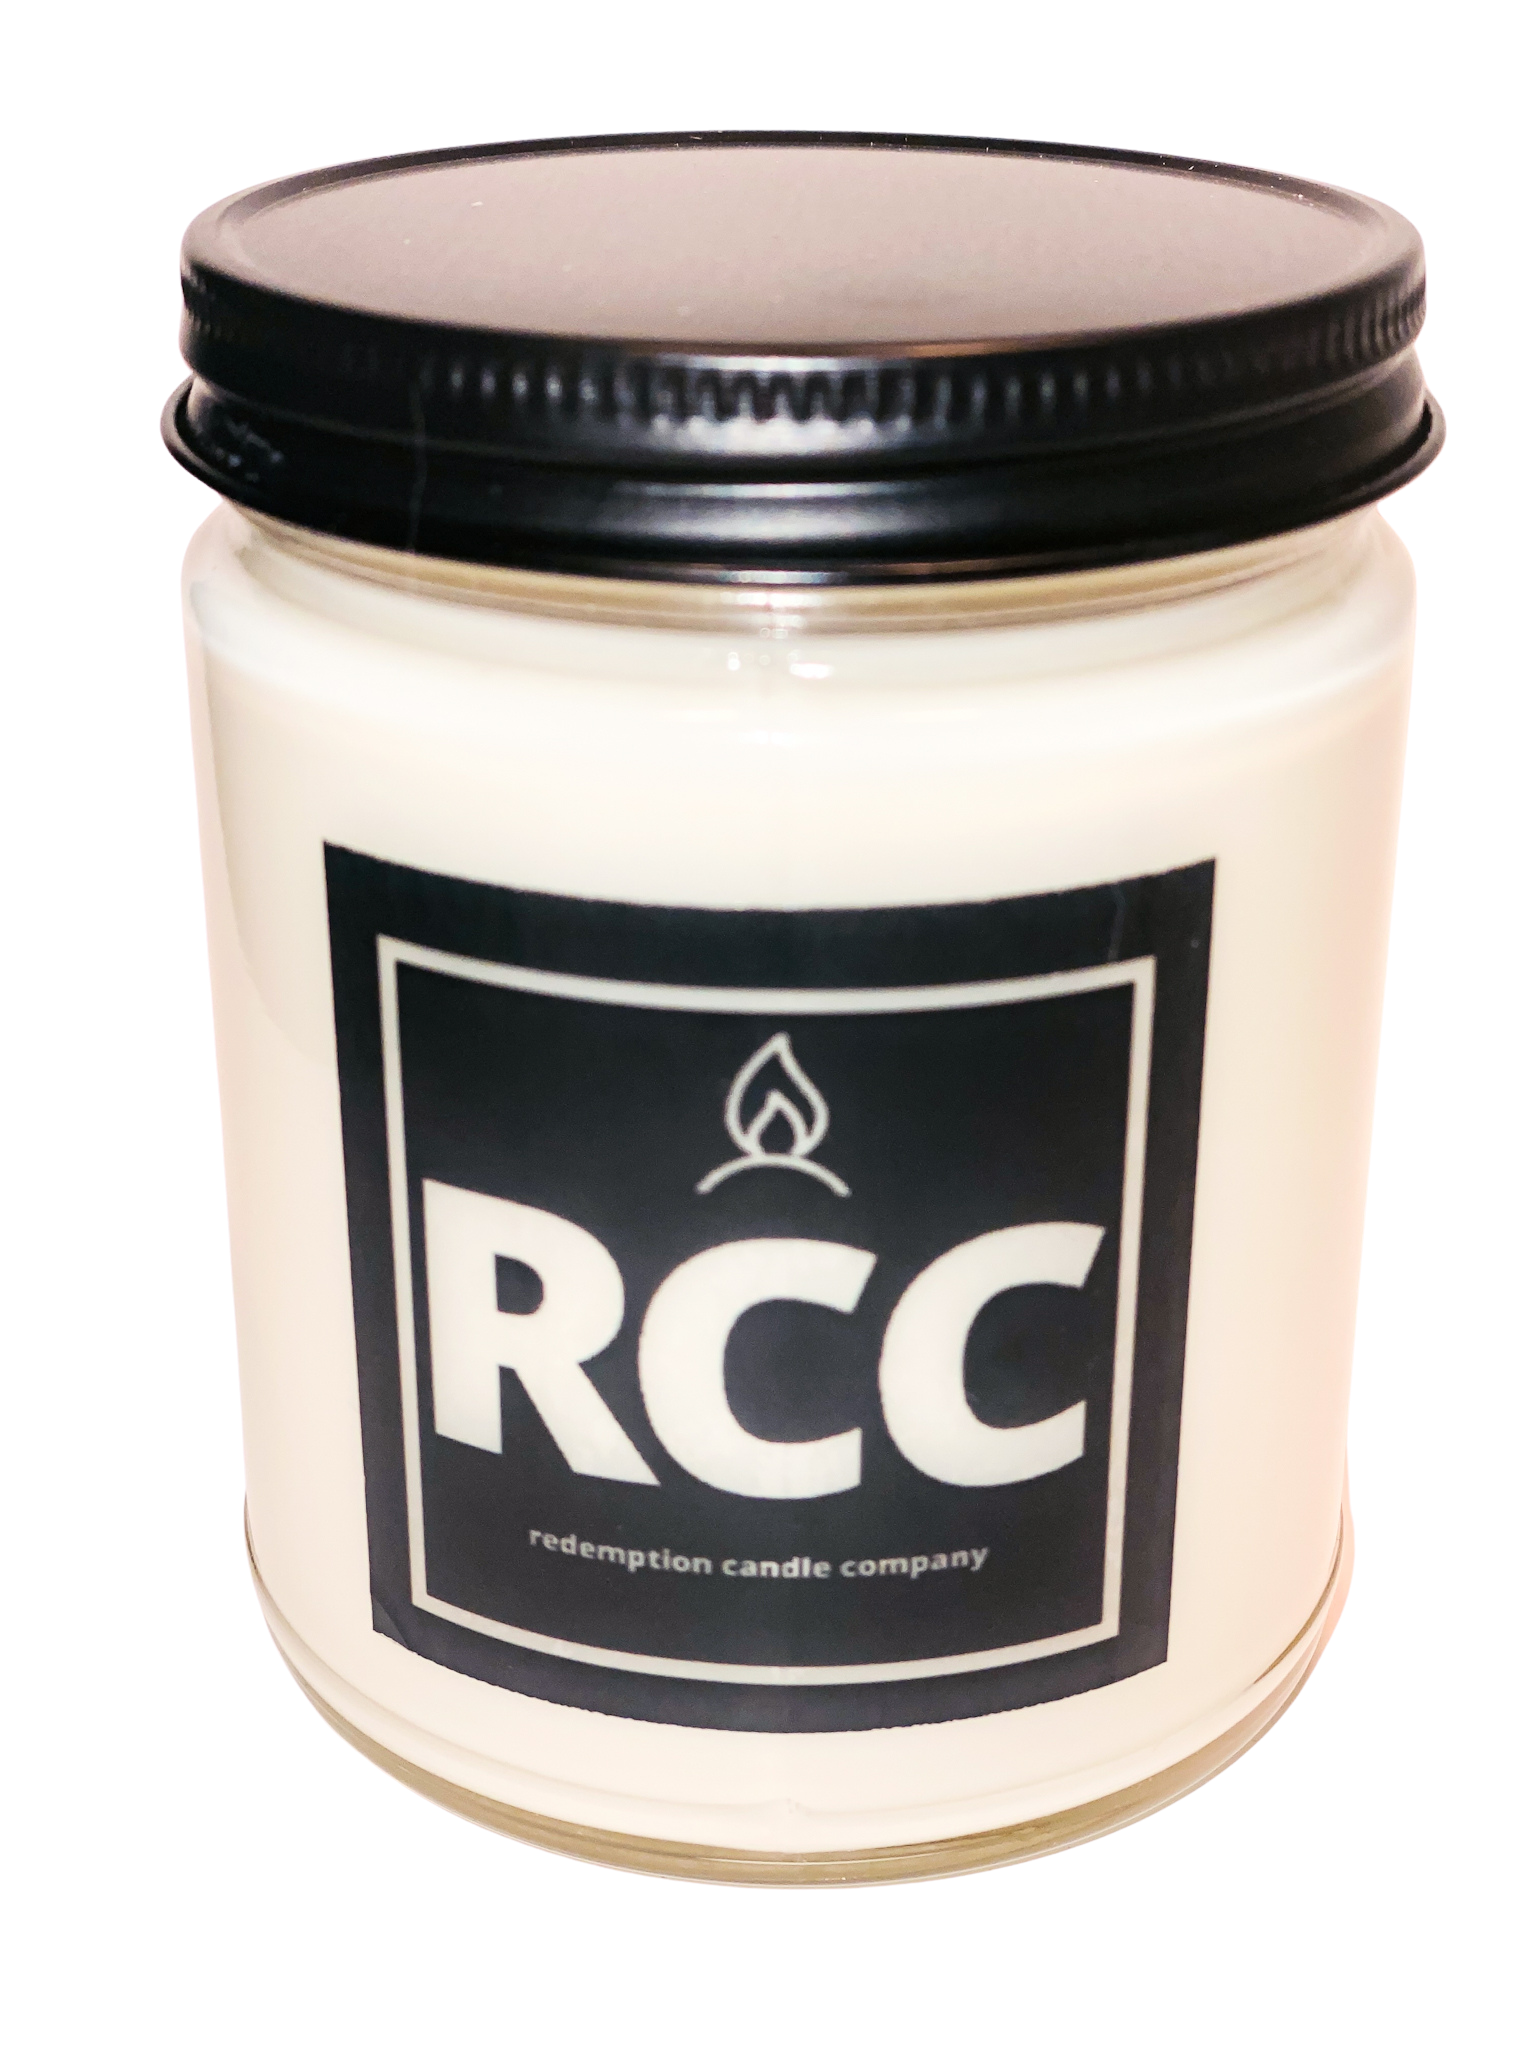 Coconut Lime Verbena - Redemption Candle Company